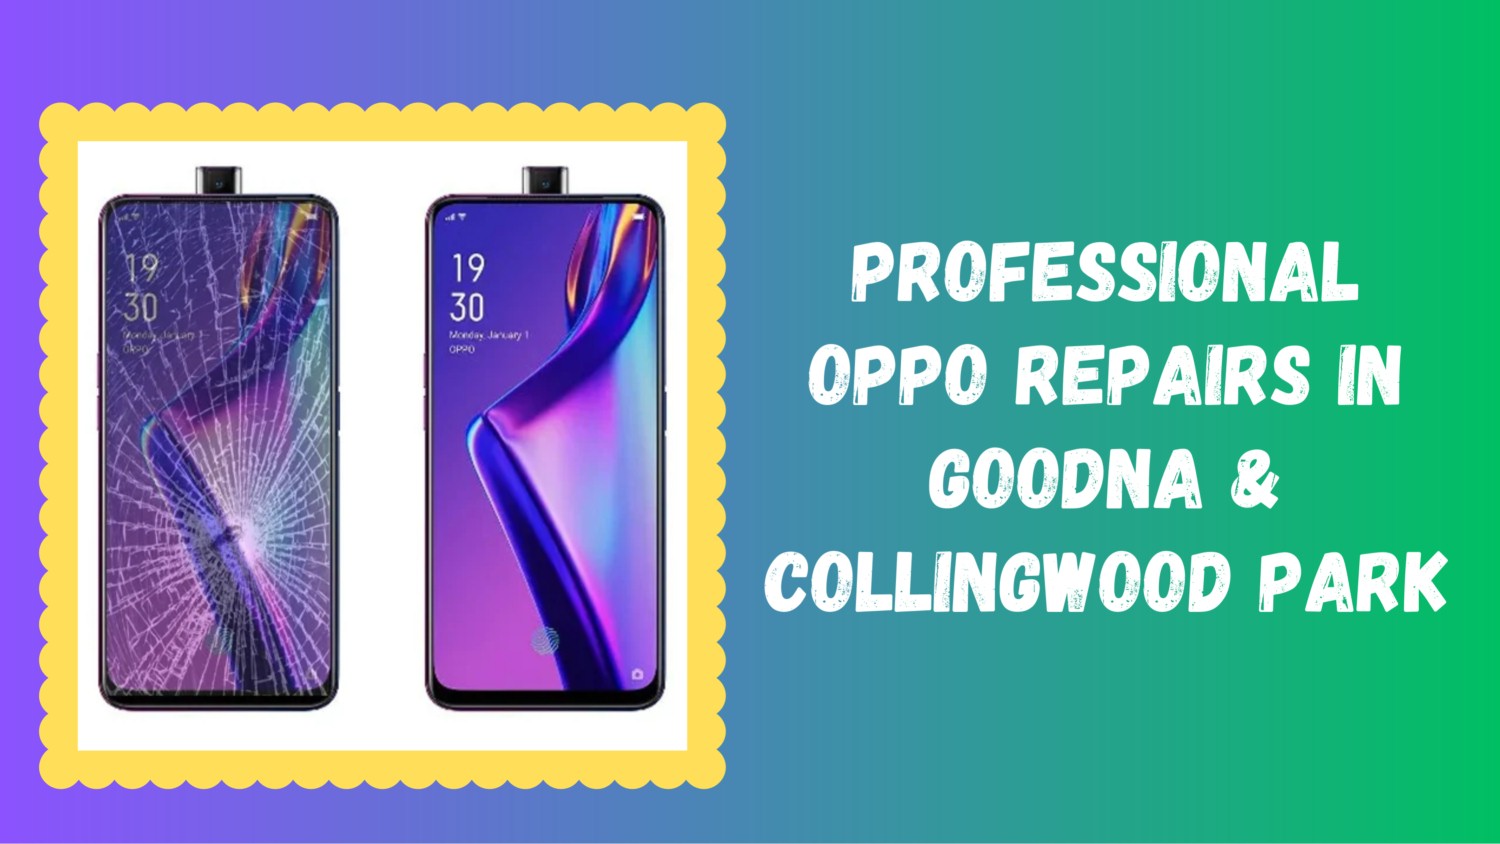 Professional Oppo Repairs in Goodna & Collingwood Park